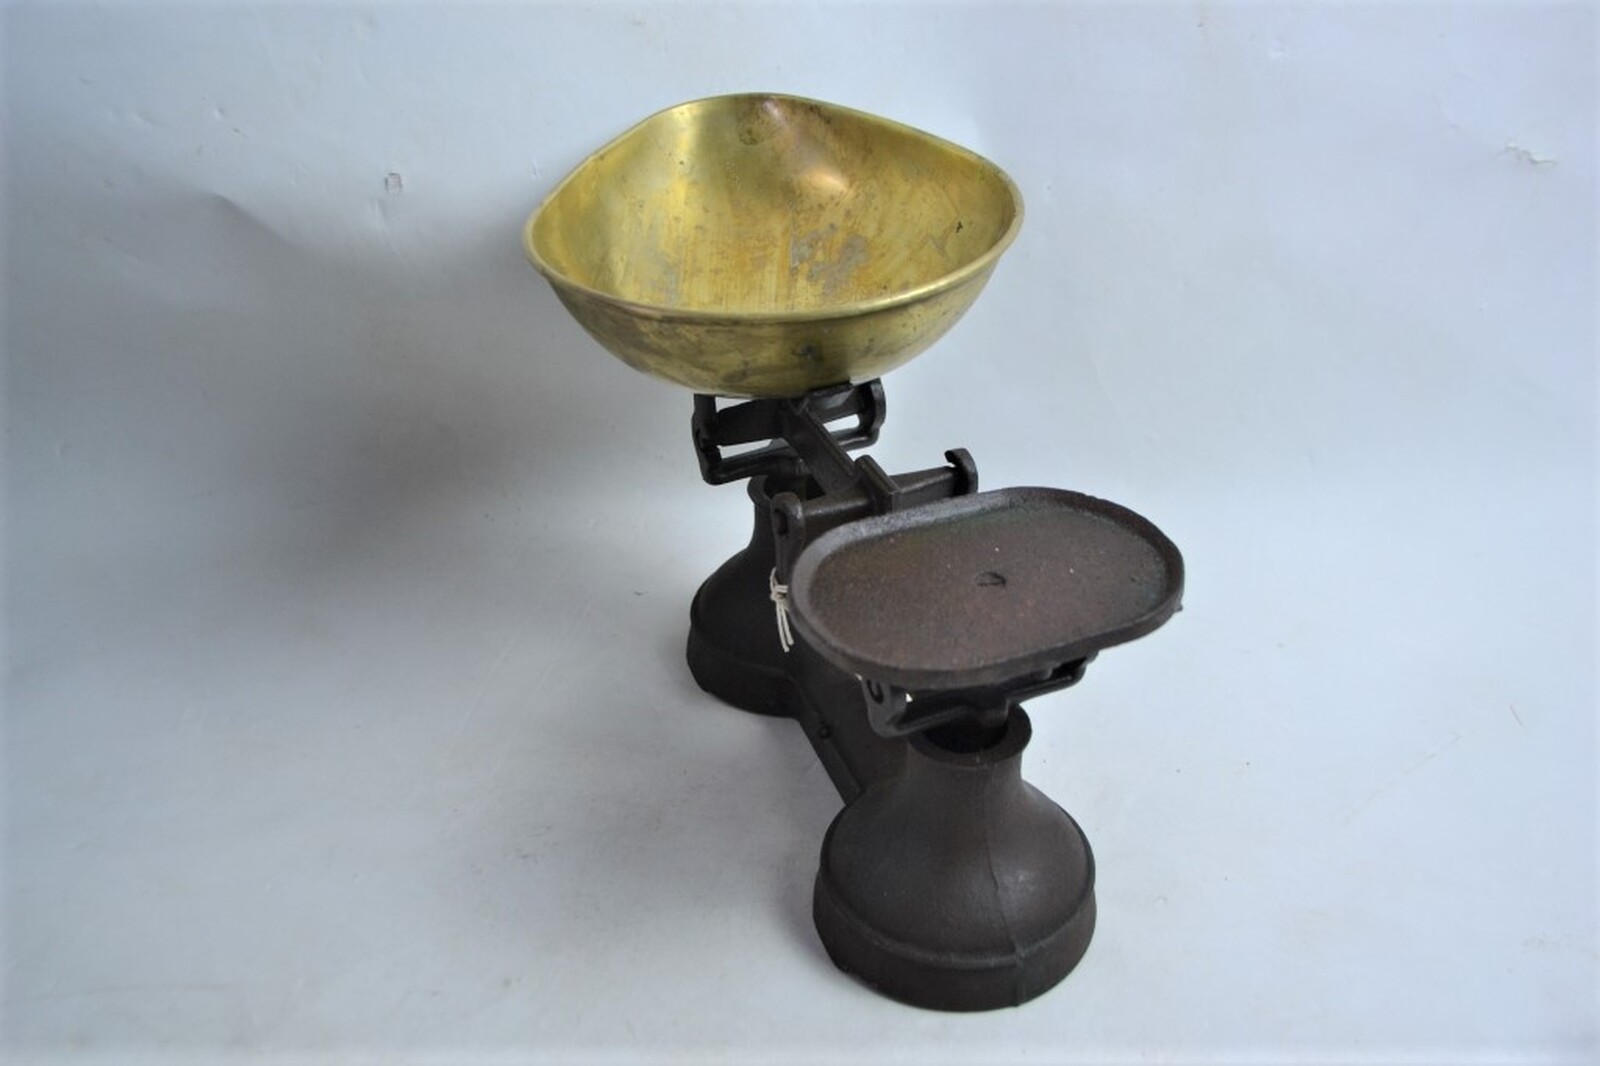 A Pair Of Vintage Kitchen Scales With Brass Pan